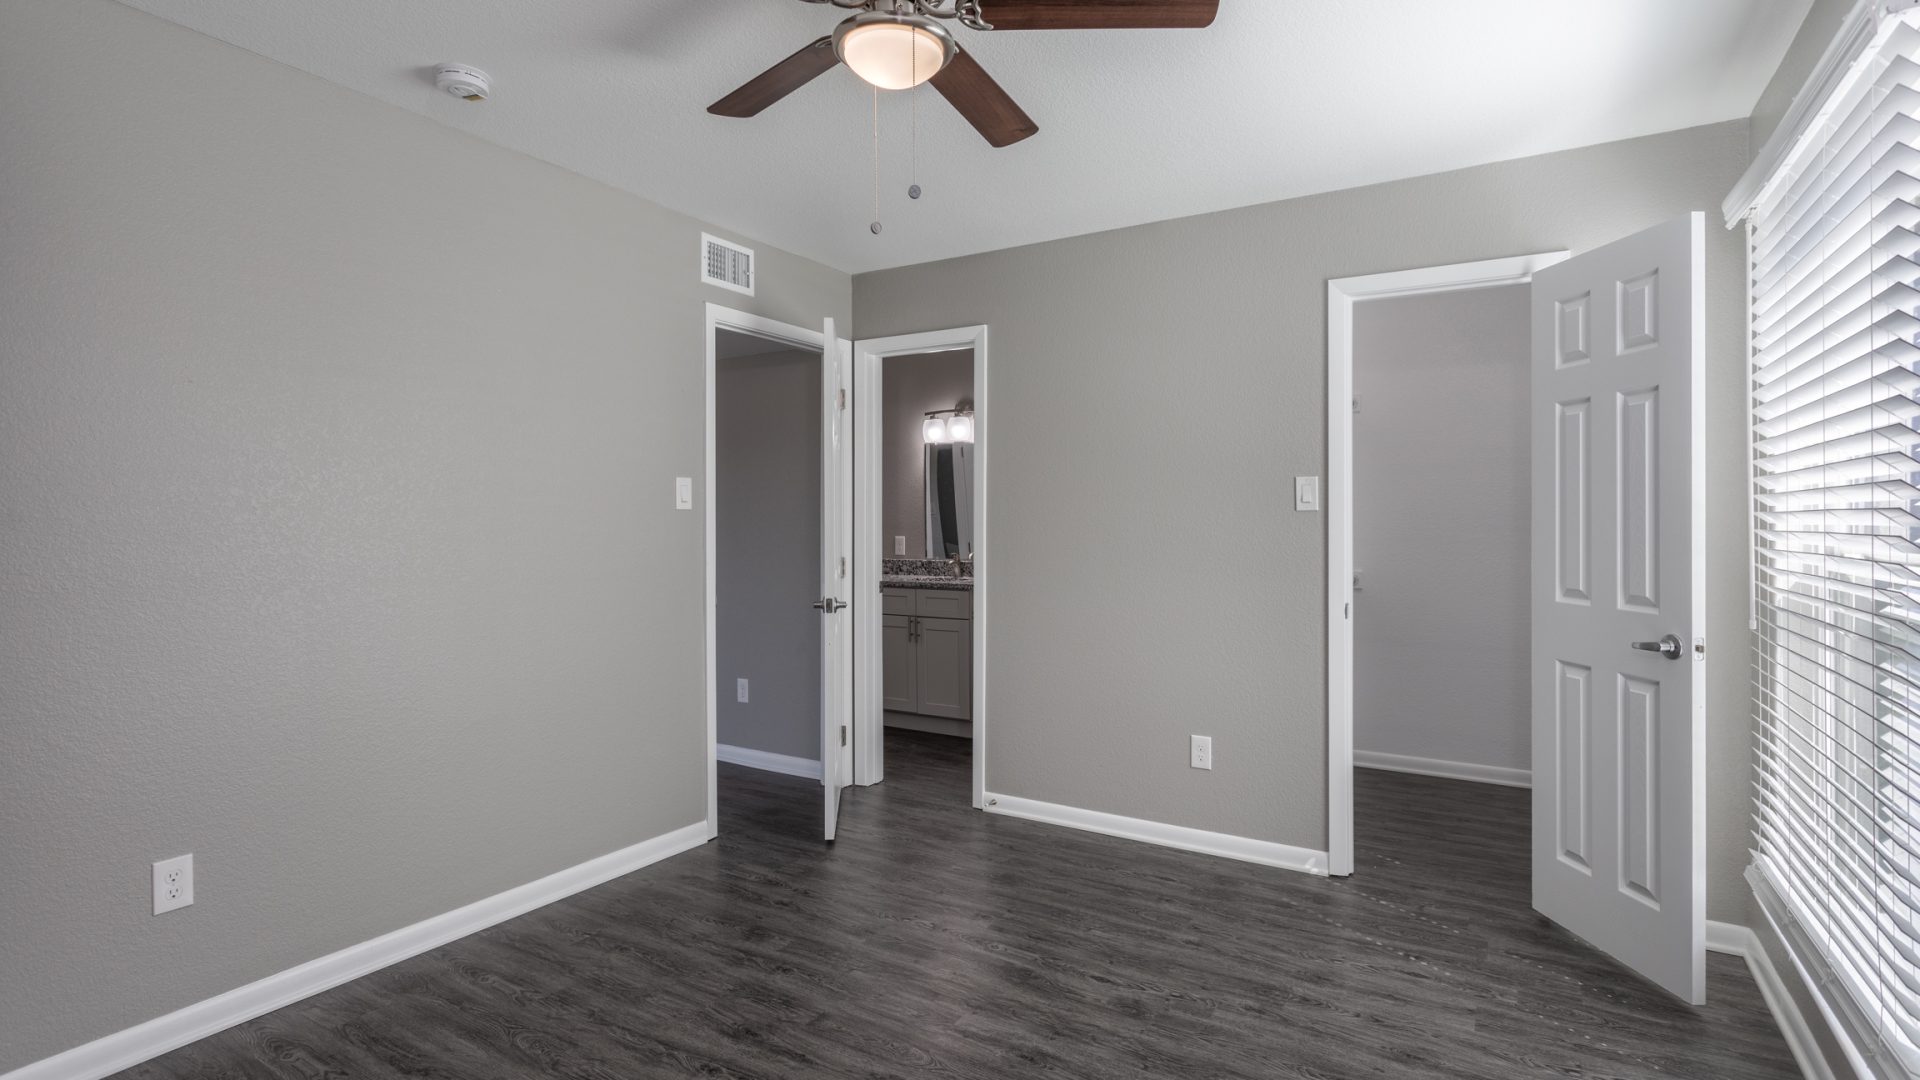 Picture of a bedroom in an apartment with dark brown, vinyl flooring, gray walls, and a ceiling fan.